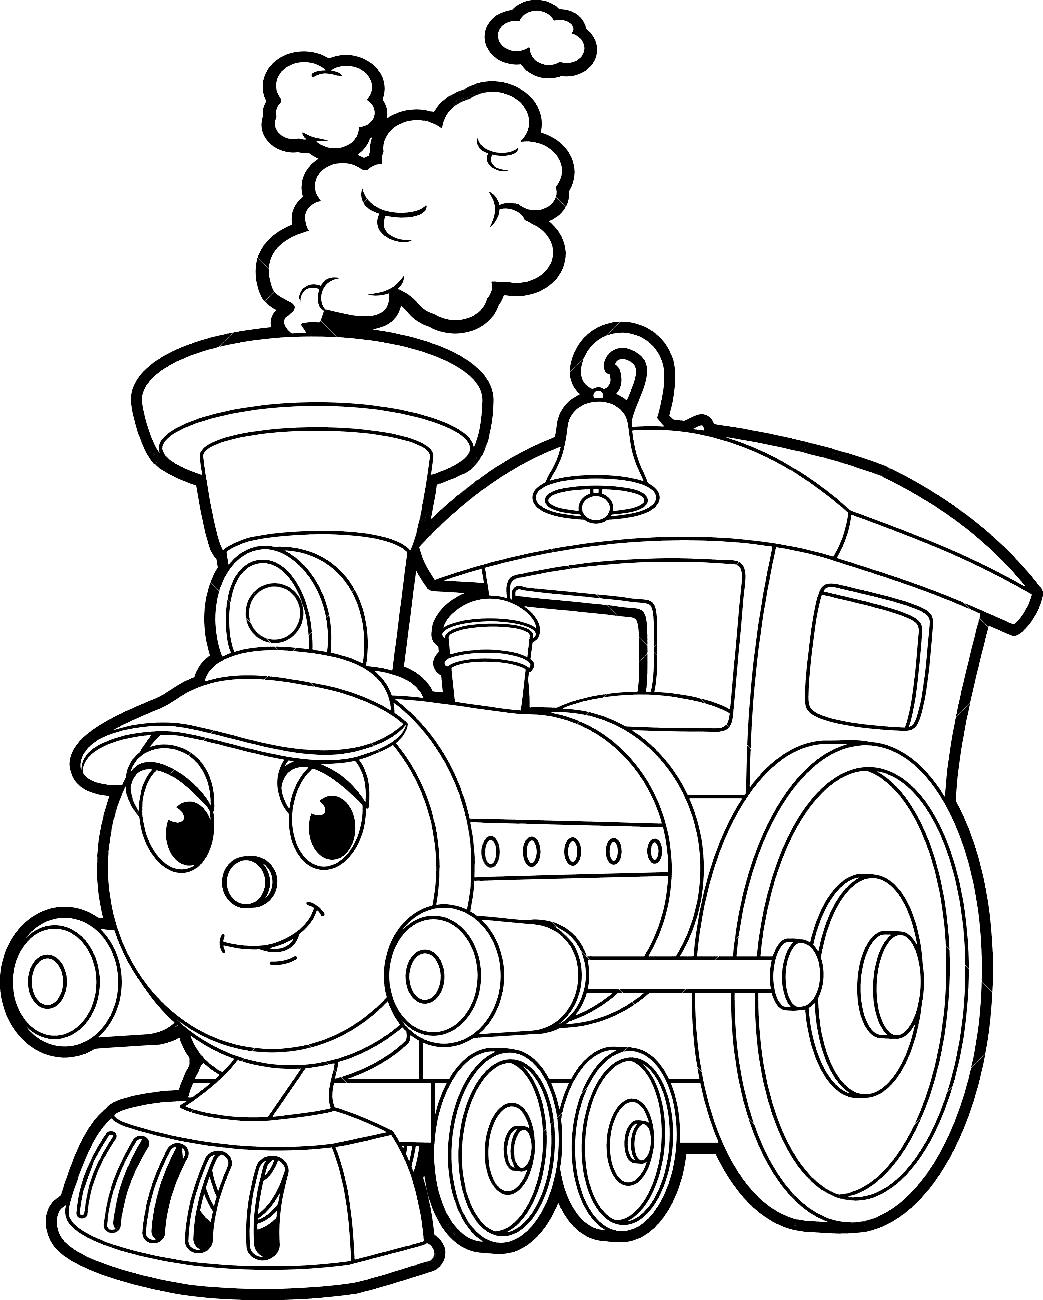 Smiling Train Coloring Page - Free Printable Coloring Pages